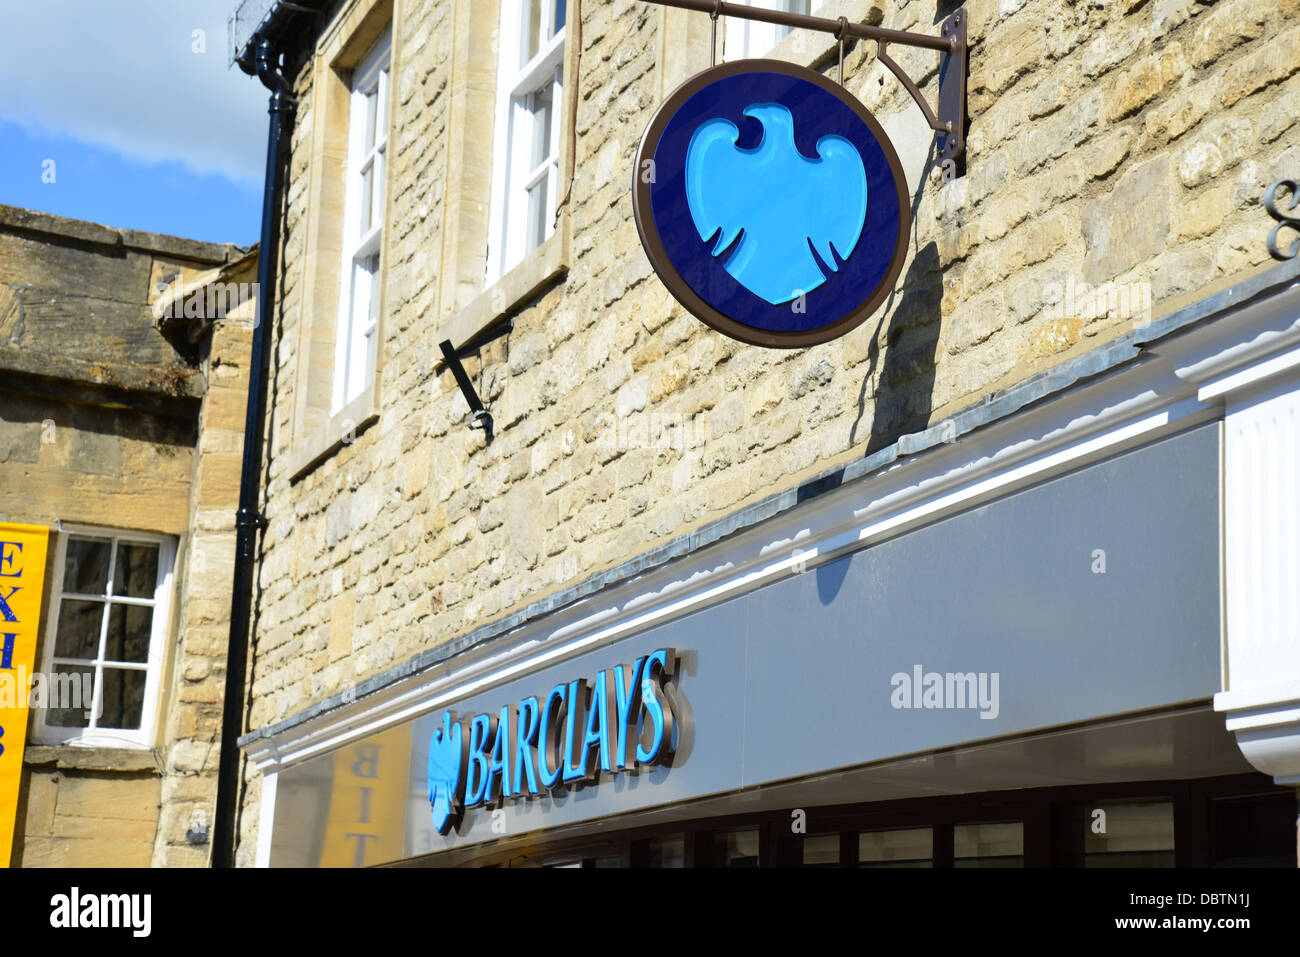 Barclays Bank, High Street, Burford, Cotswolds, Oxfordshire, Angleterre, Royaume-Uni Banque D'Images